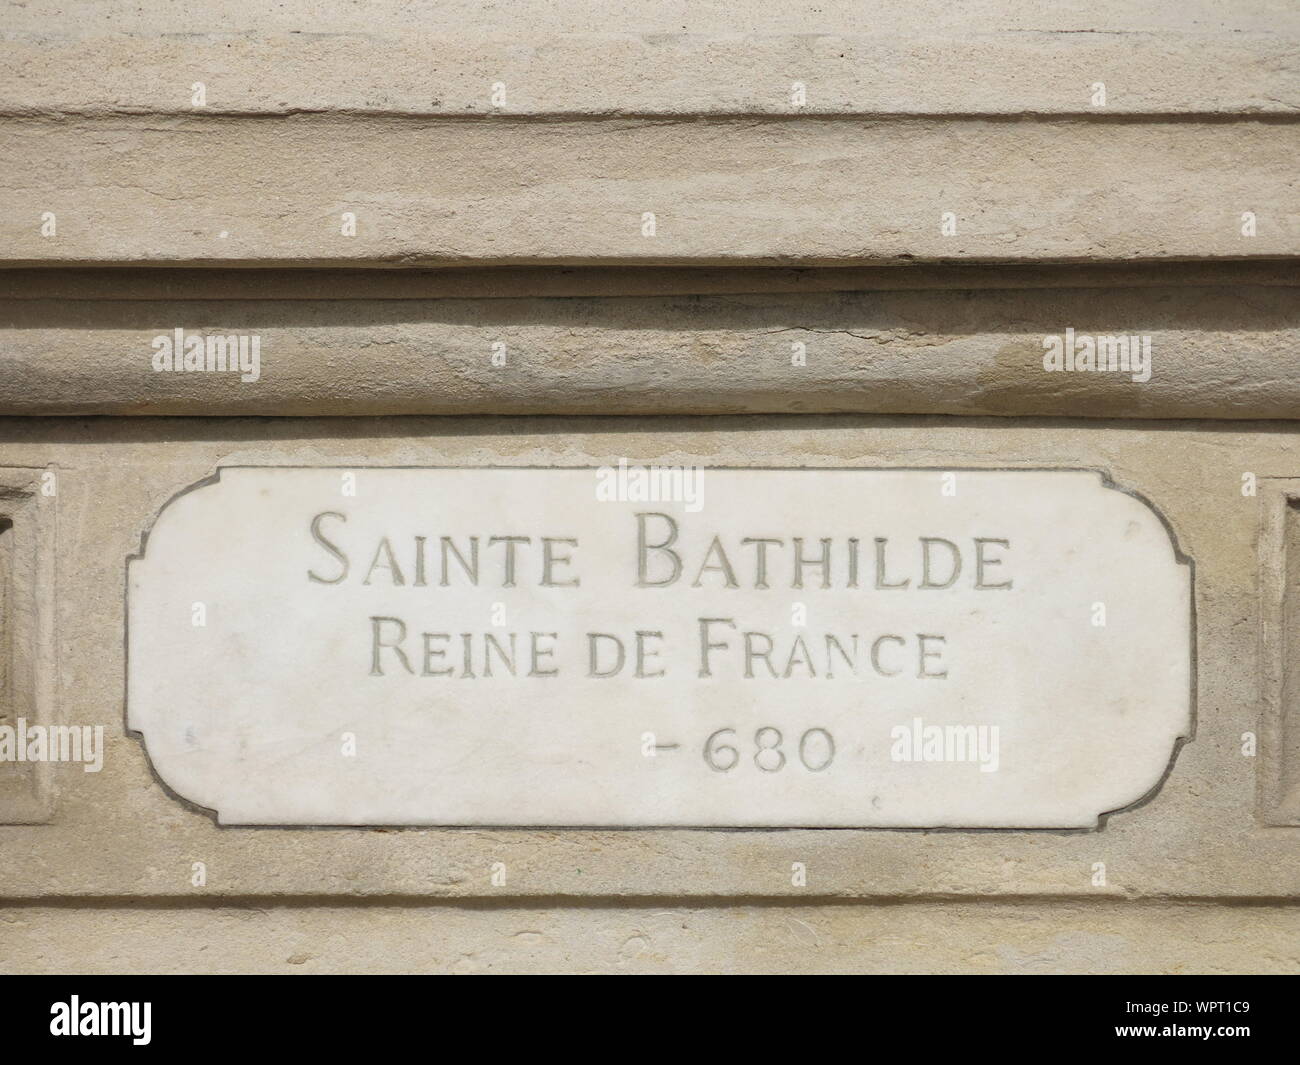 The engraving at the foot of the stone pedestal for the sculpture of 'Sainte Bathilde Reine de France', a 7th century Queen in French history. Stock Photo